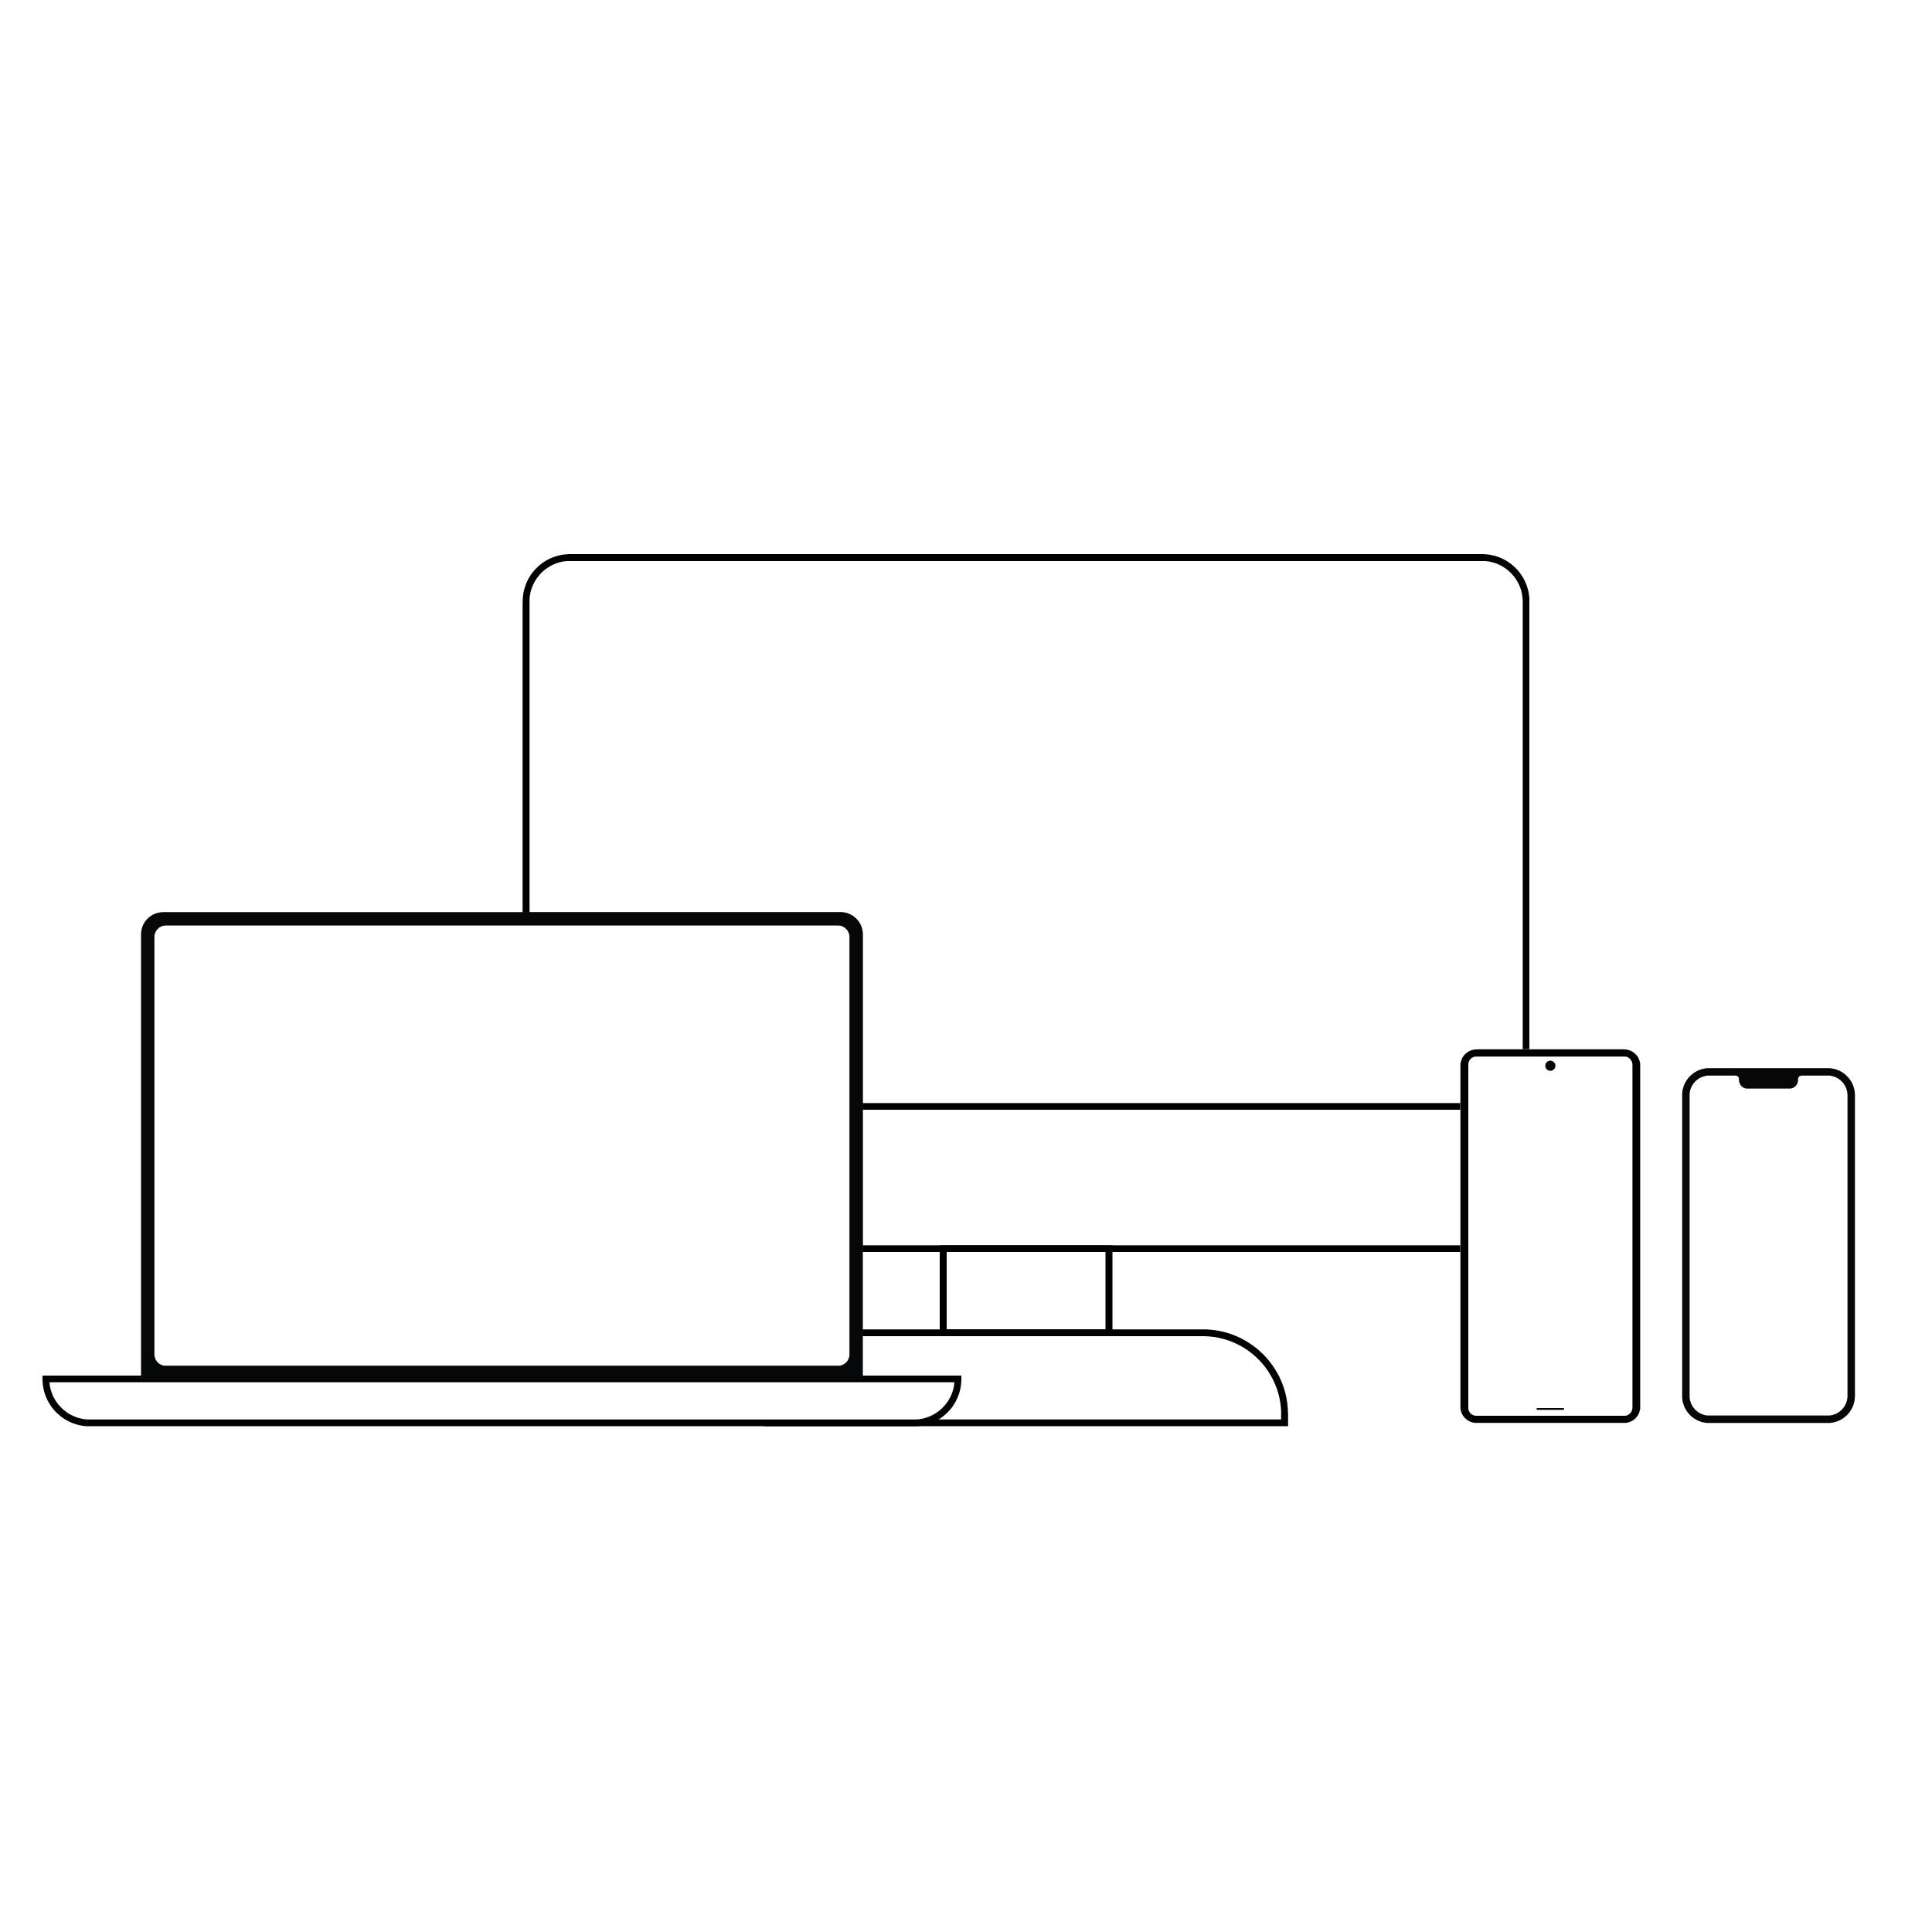 Line drawings of a desktop computer, laptop computer, Android mobile phone, and an Apple mobile phone.